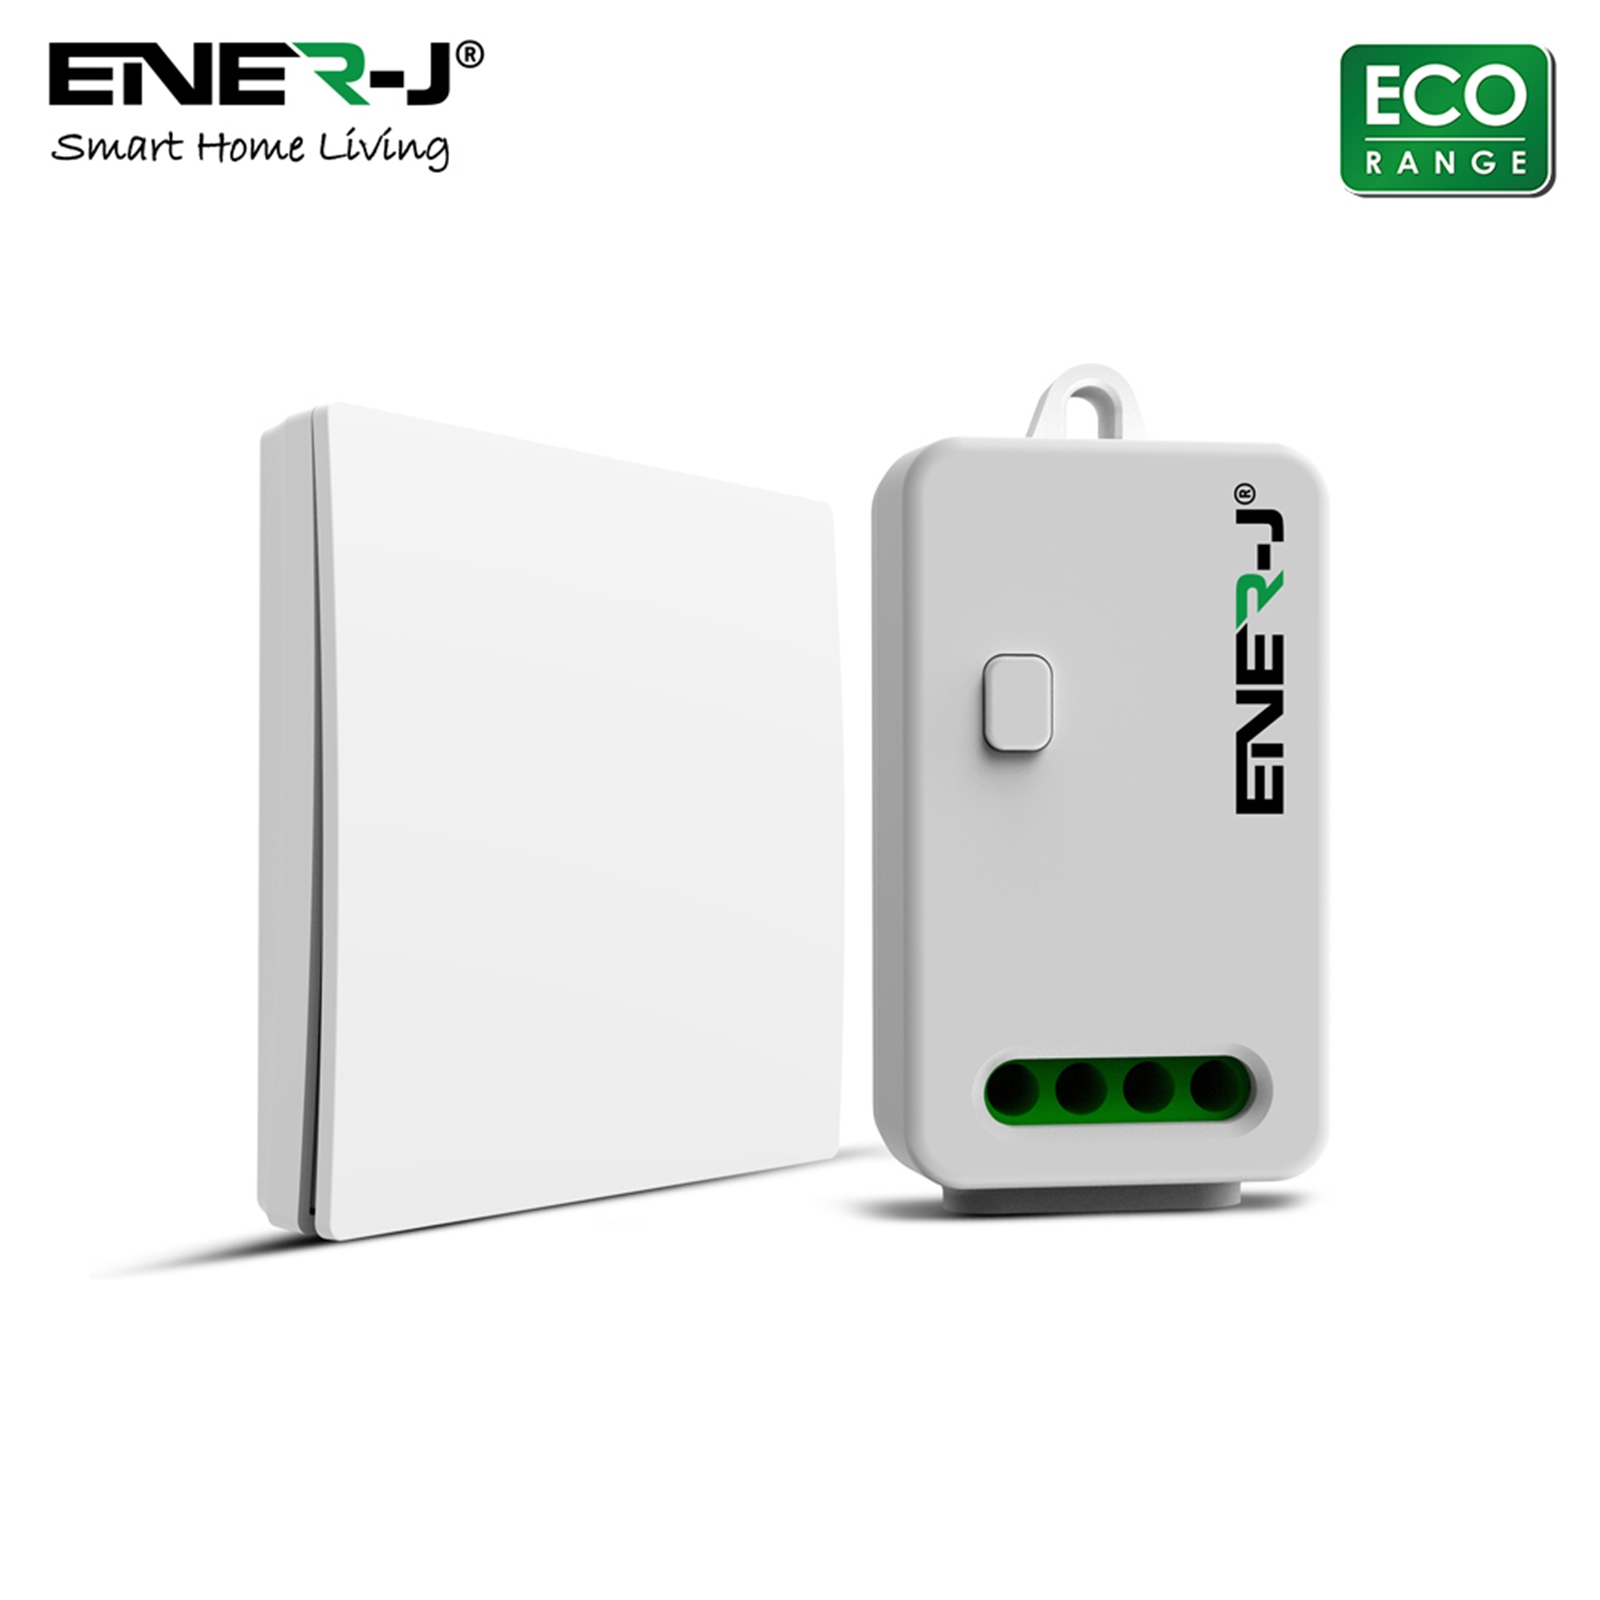 Ener-J 1 Gang Wireless Dimmable Kinetic Switch with WiFi Receiver Bundle Kit